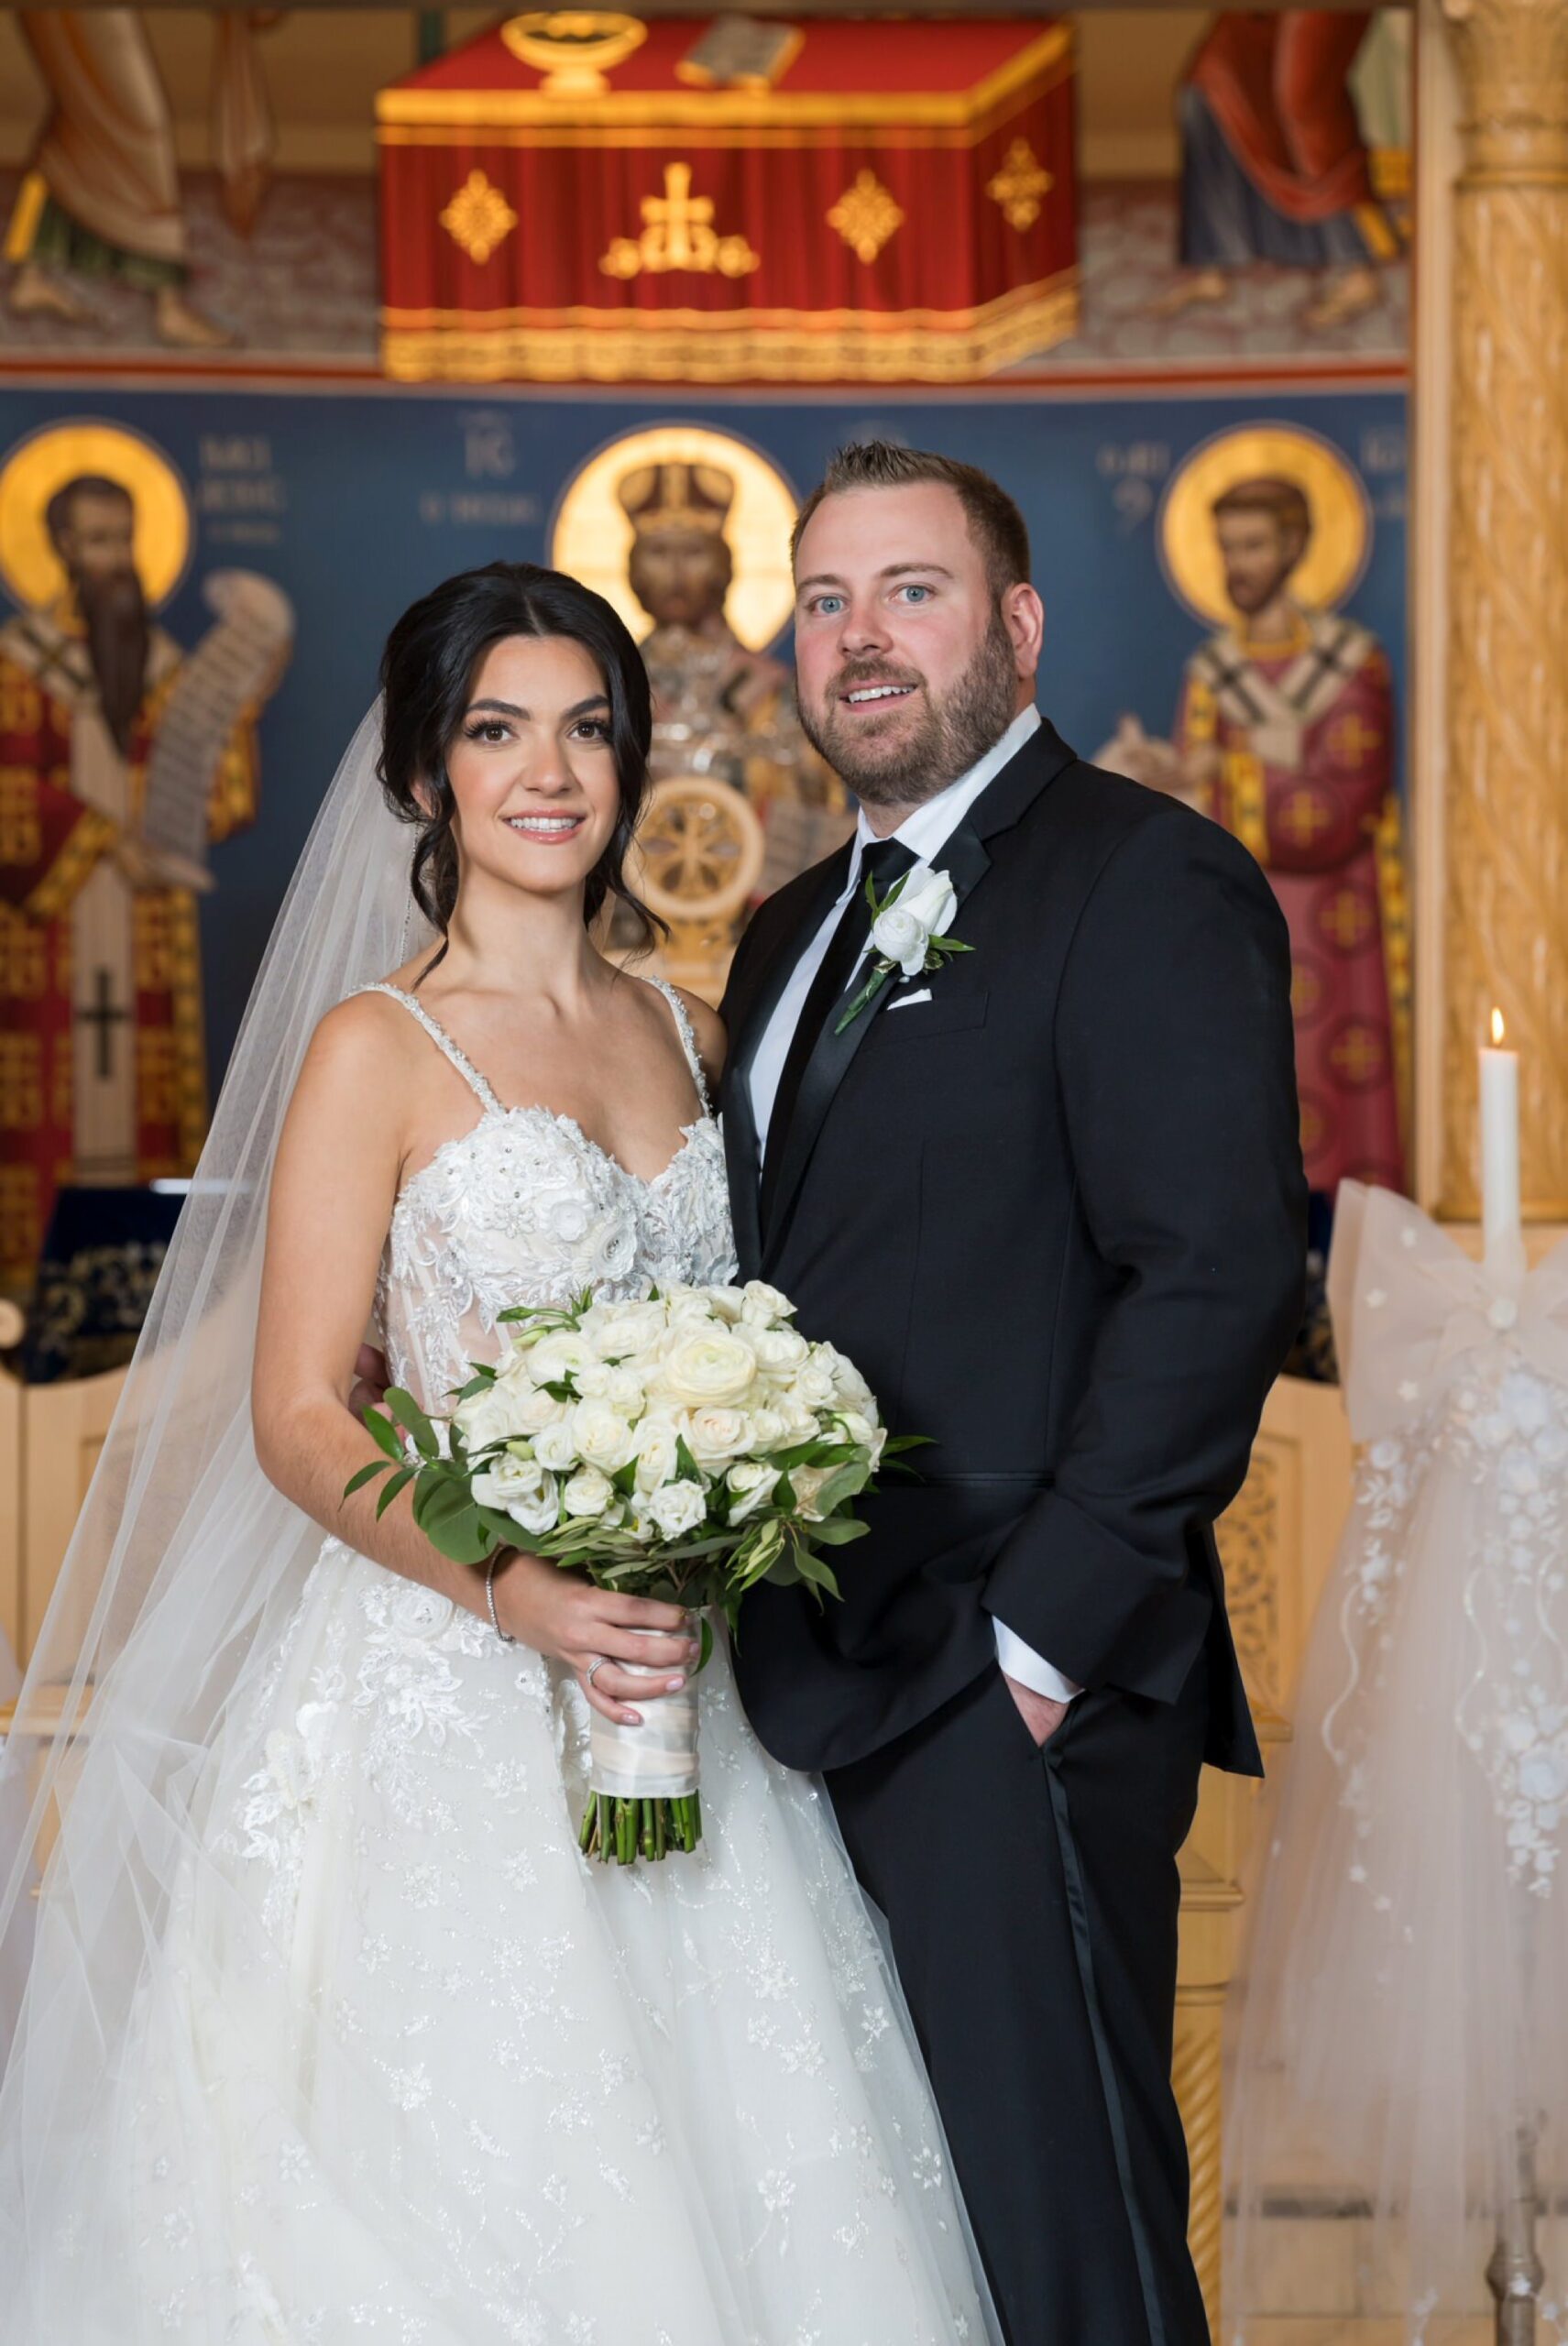 The bride and groom pose at the altar of their Assumption Greek Orthodox wedding for a formal portrait.  